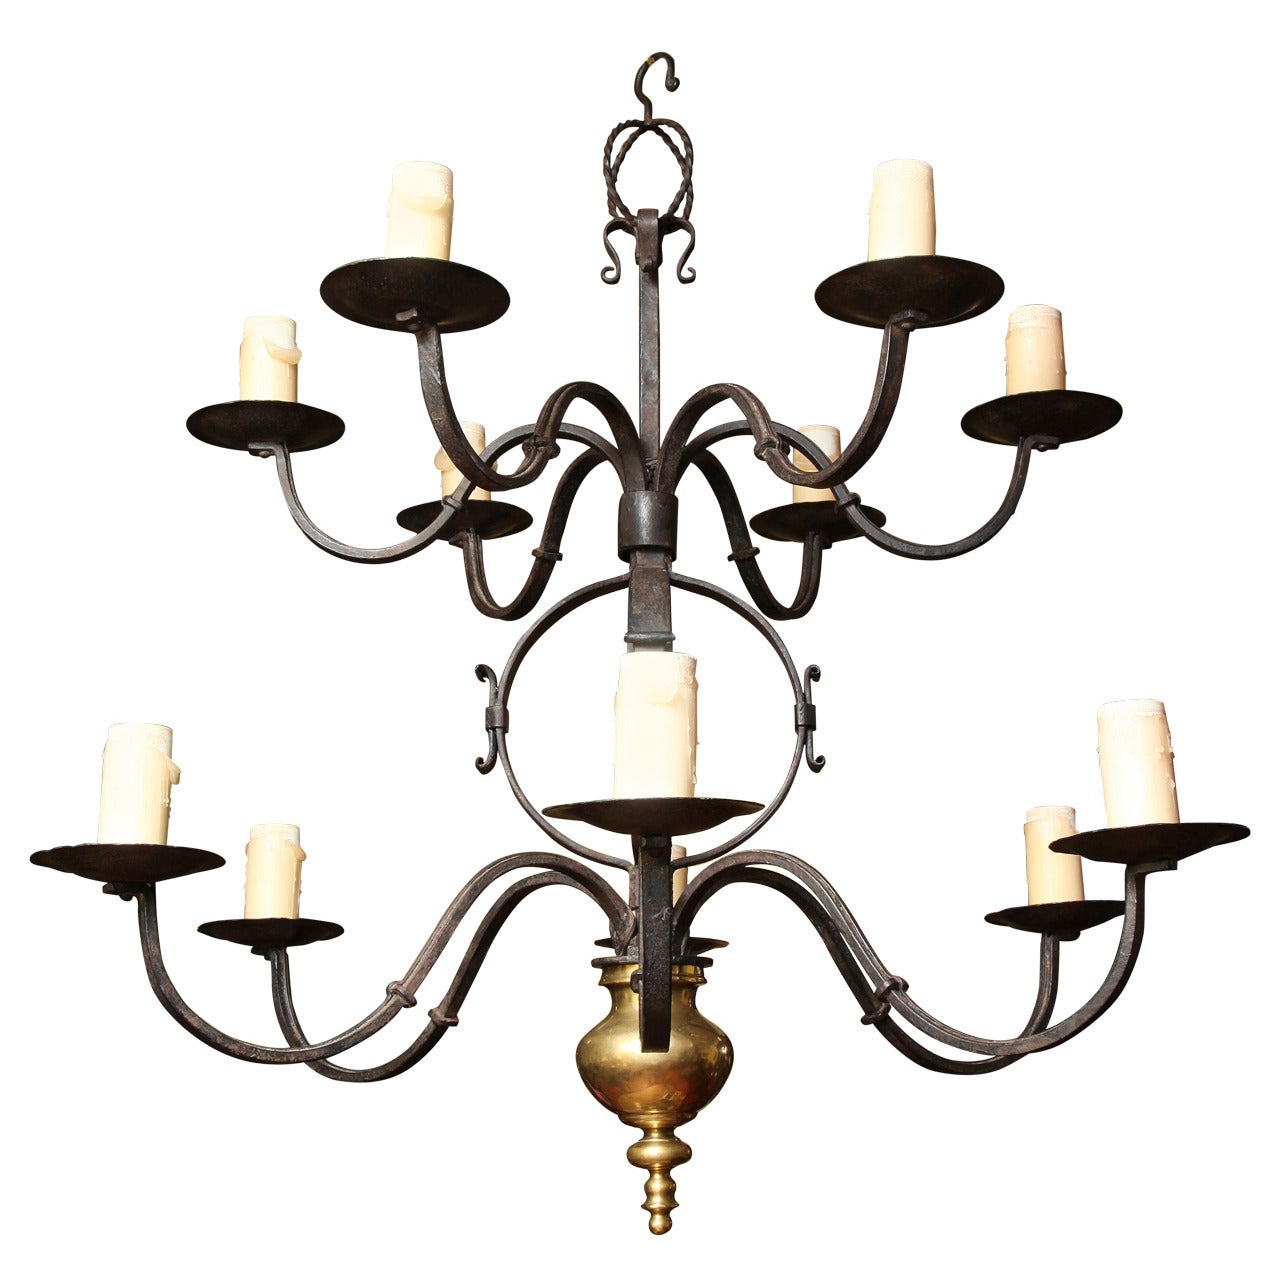 Two-Tier Hand-Forged Iron and Brass Twelve-Light Chandelier For Sale